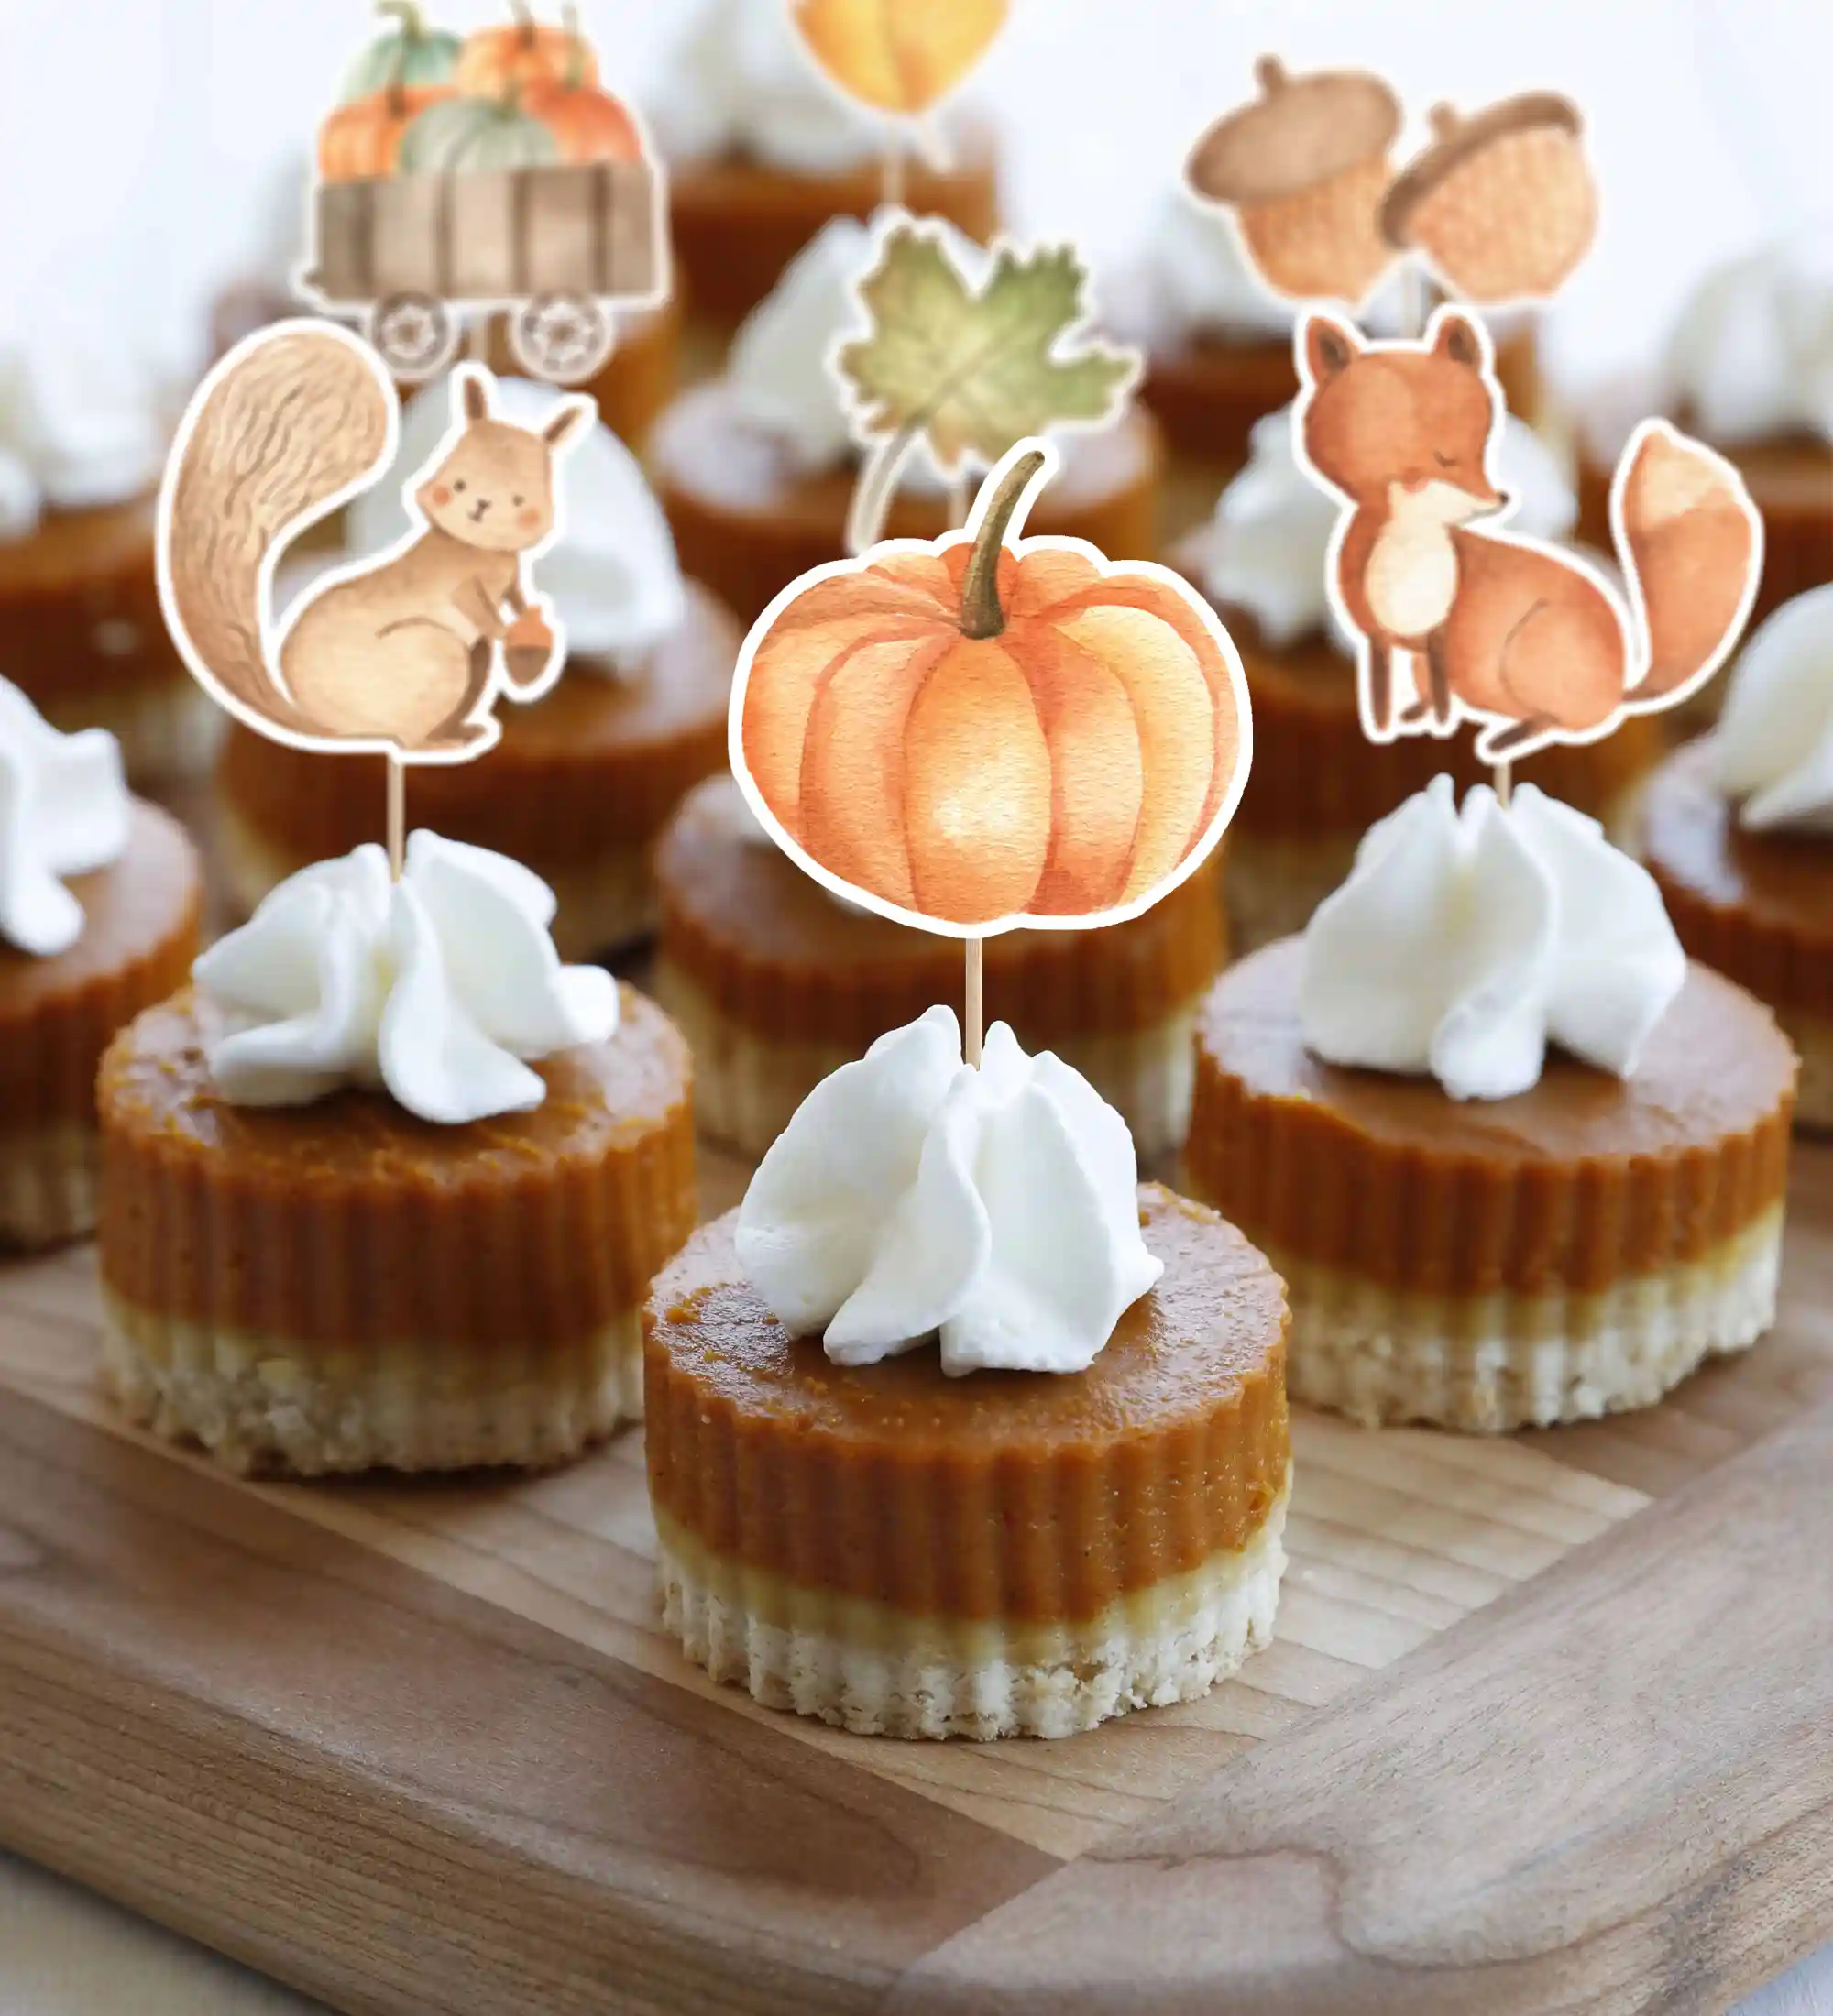 Decorate this Thanksgiving with easy DIY printables like Thanksgiving cupcake toppers, food label cards, activity pages, and more. We want to help you set an easy and fun kids table and Thanksgiving tablescape with printables.